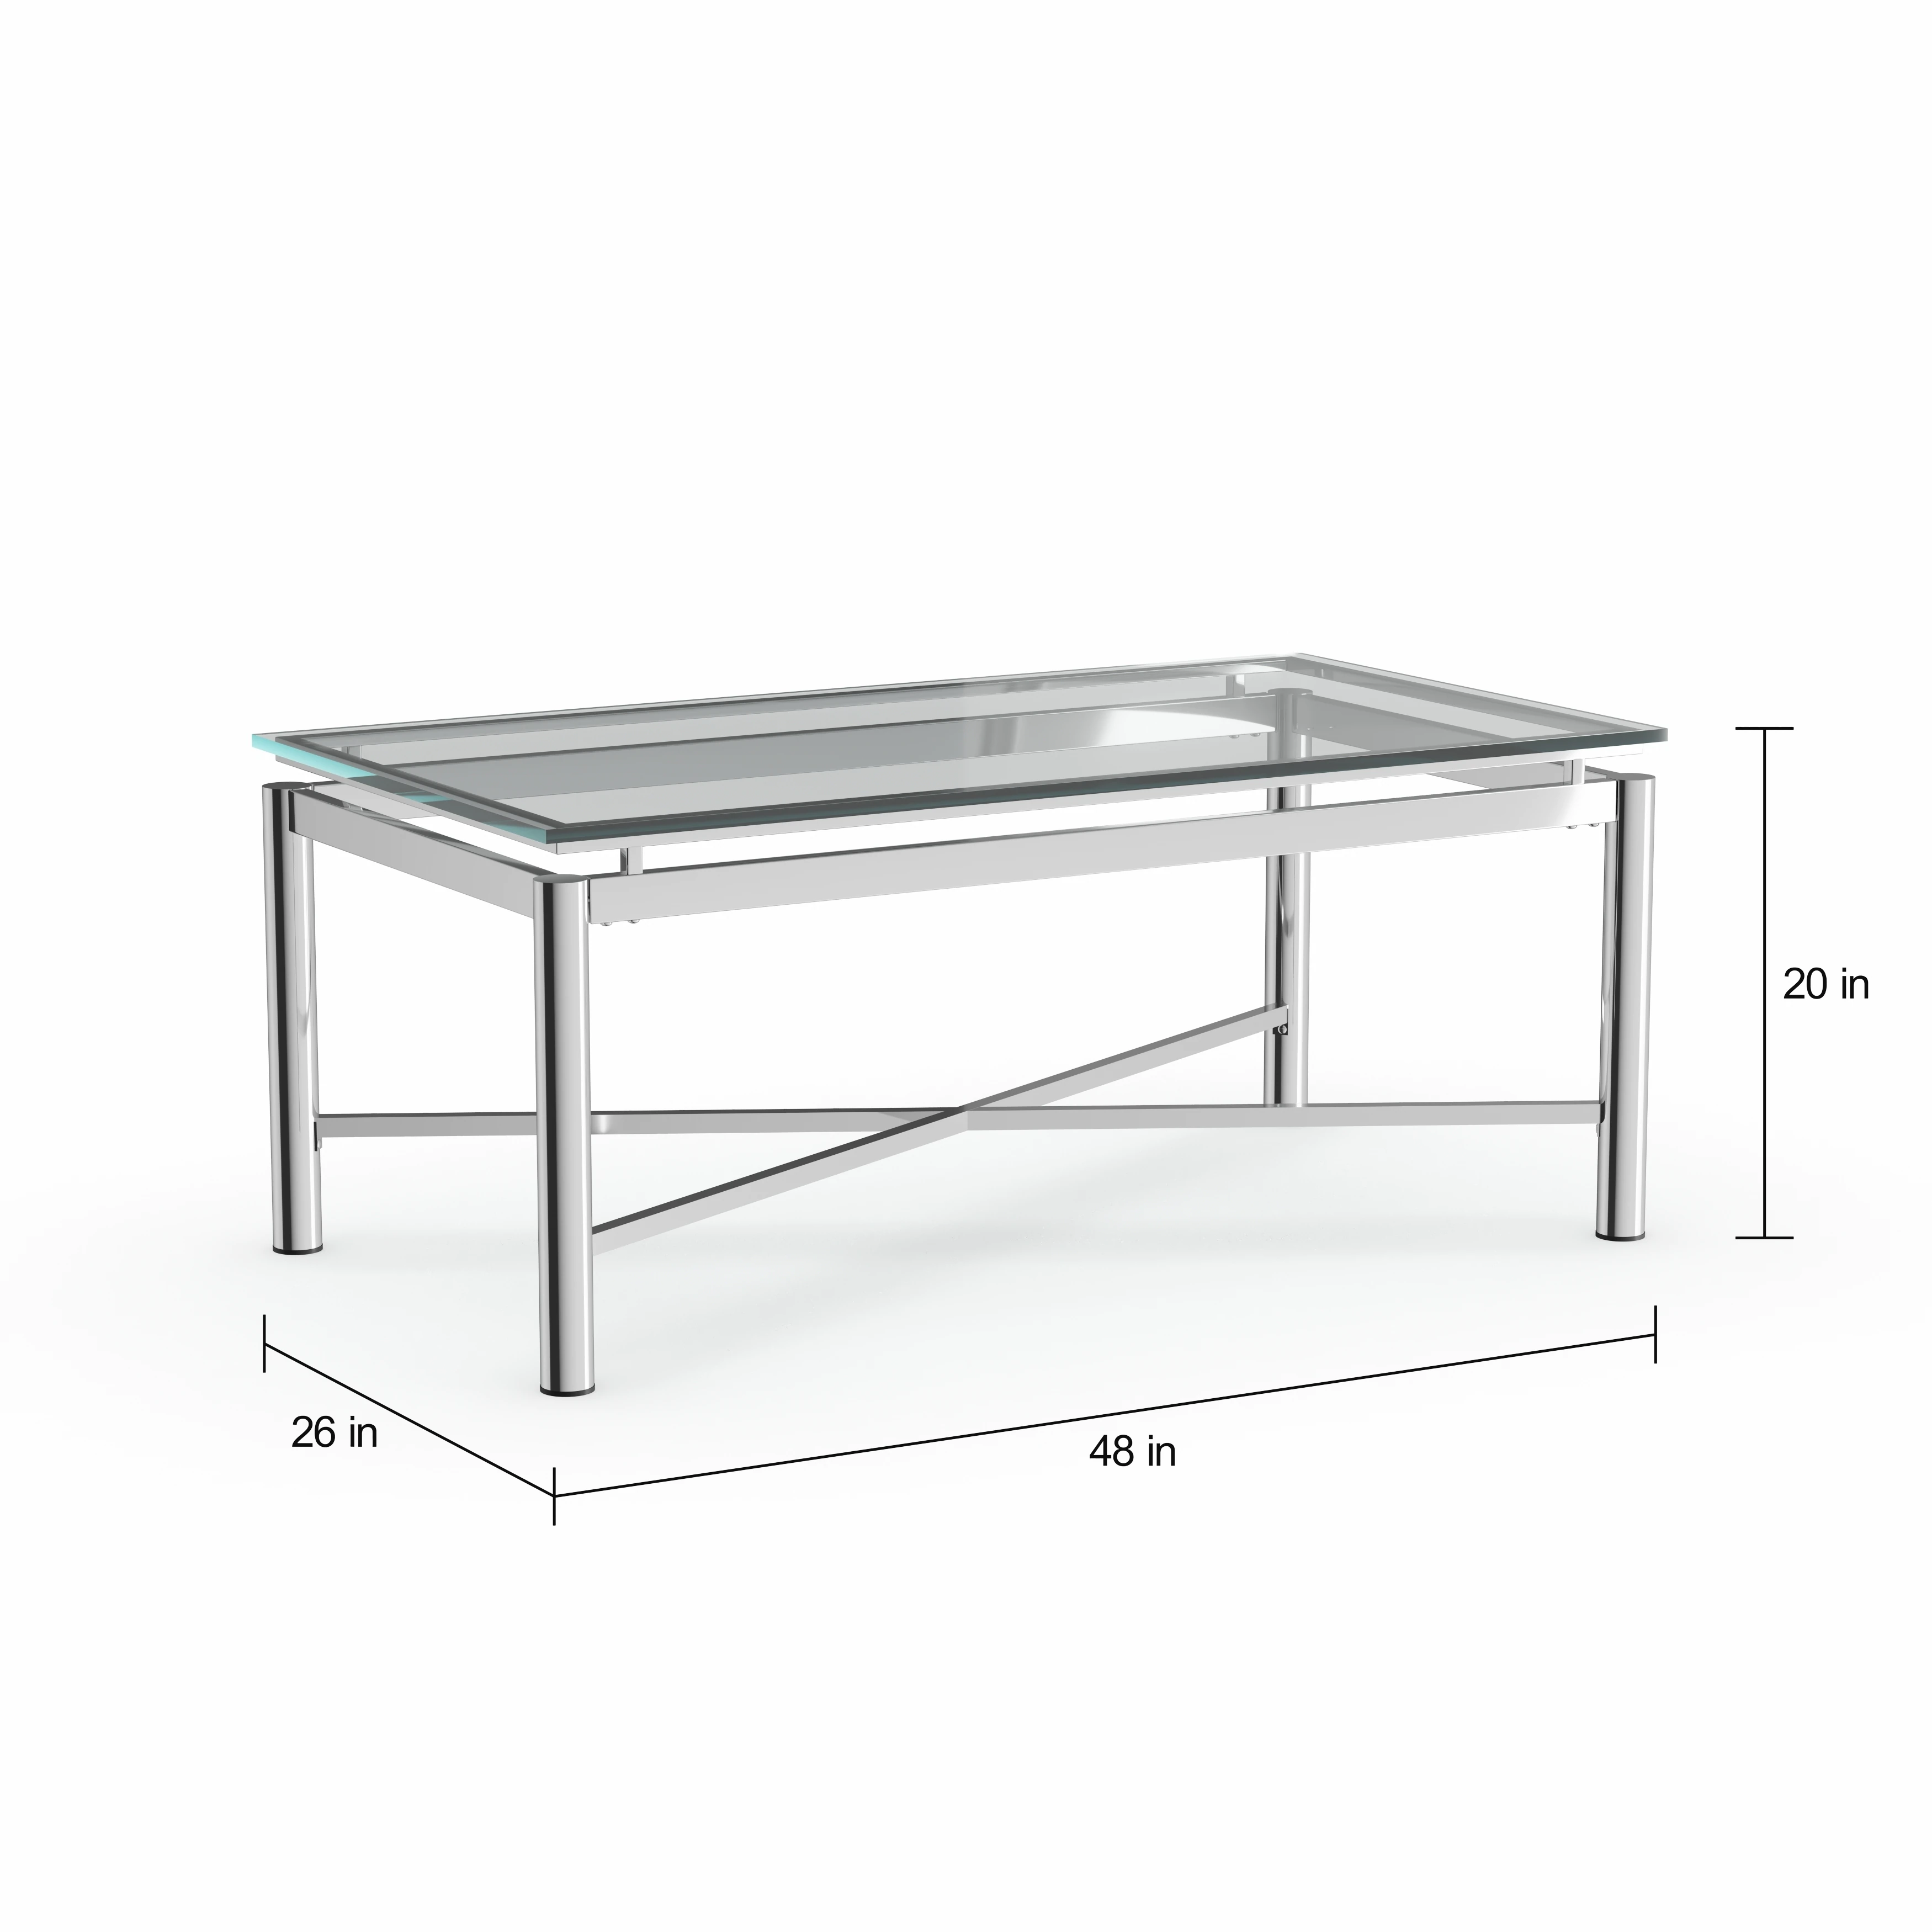 strick bolton jules chrome and glass coffee table free oliver james small accent shipping today gallerie credit card outdoor side grey safavieh couture square tables living room